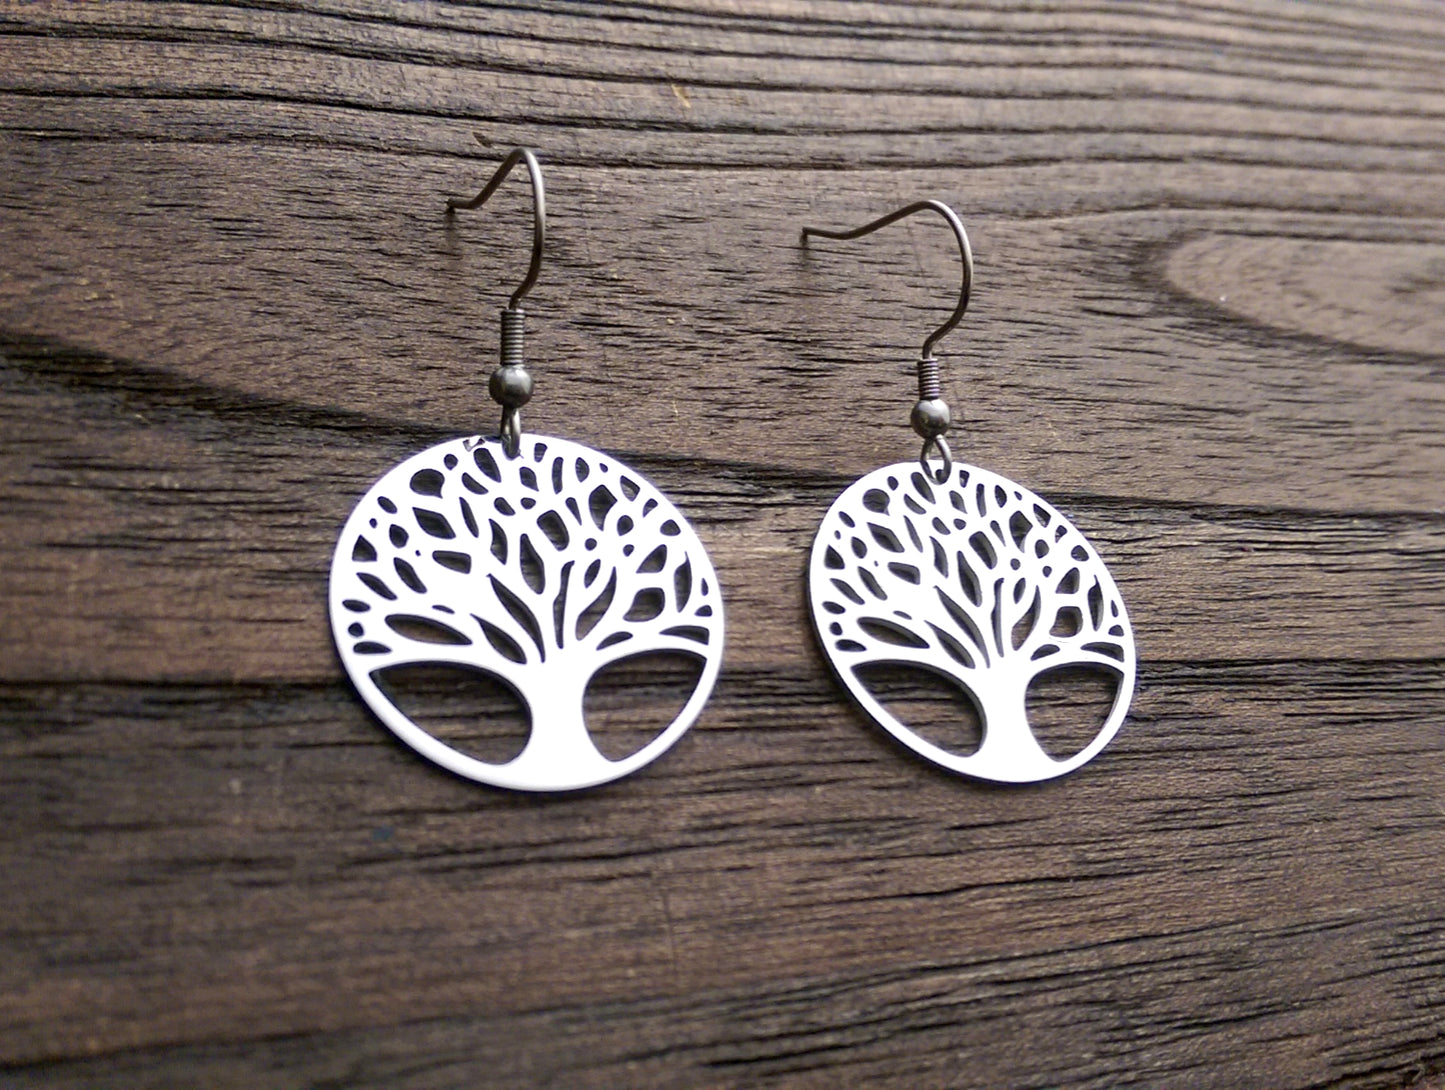 Stainless Steel Tree of Life Dangle Hook Earrings. - Silver and Resin Designs